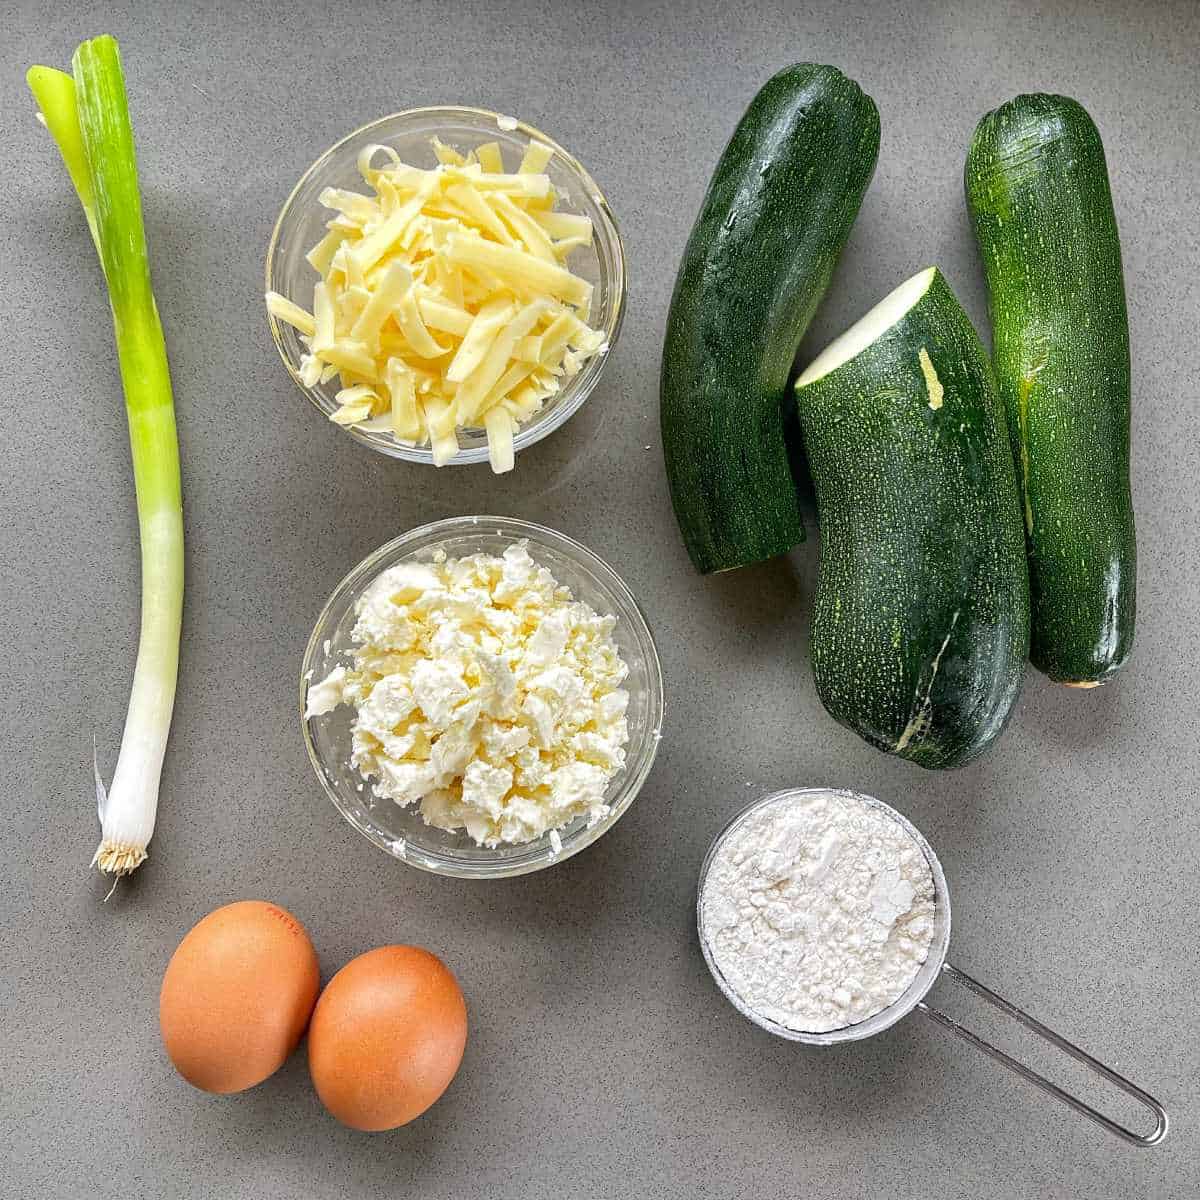 The ingredients for courgette and feta fritters on a grey bench.